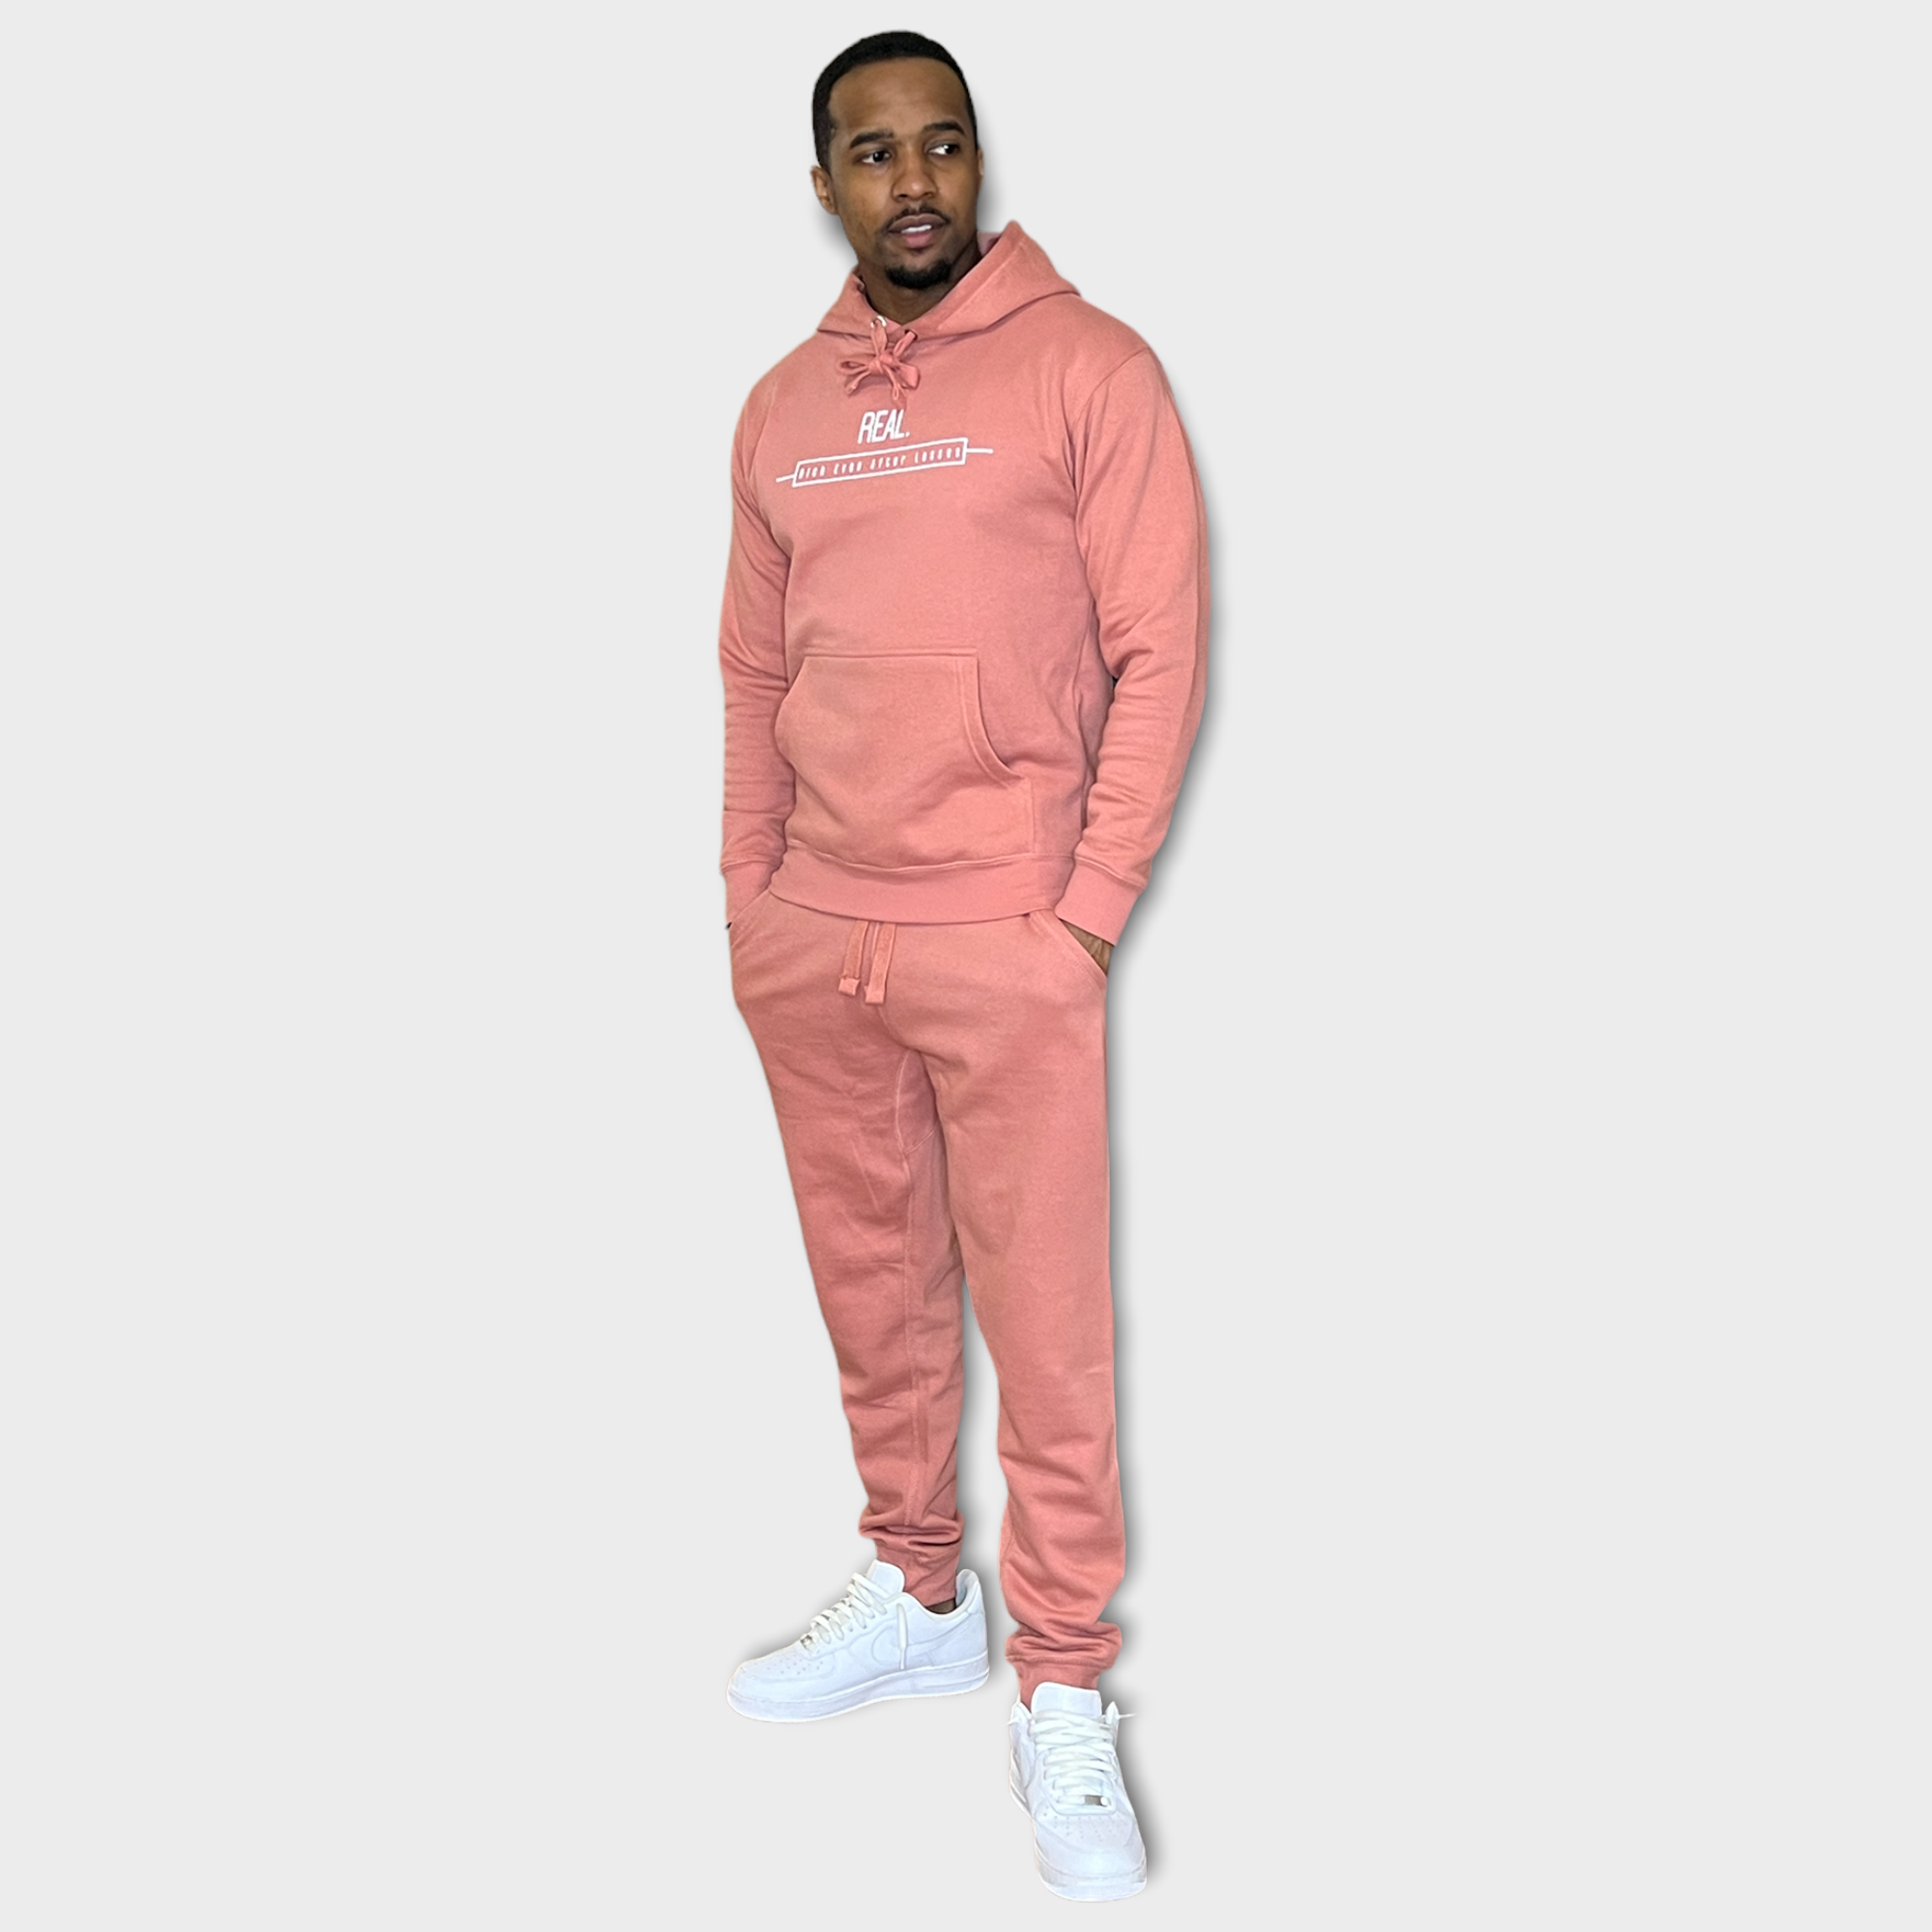 REAL Sweatsuits and Hoodies – REAL Clothing Co.